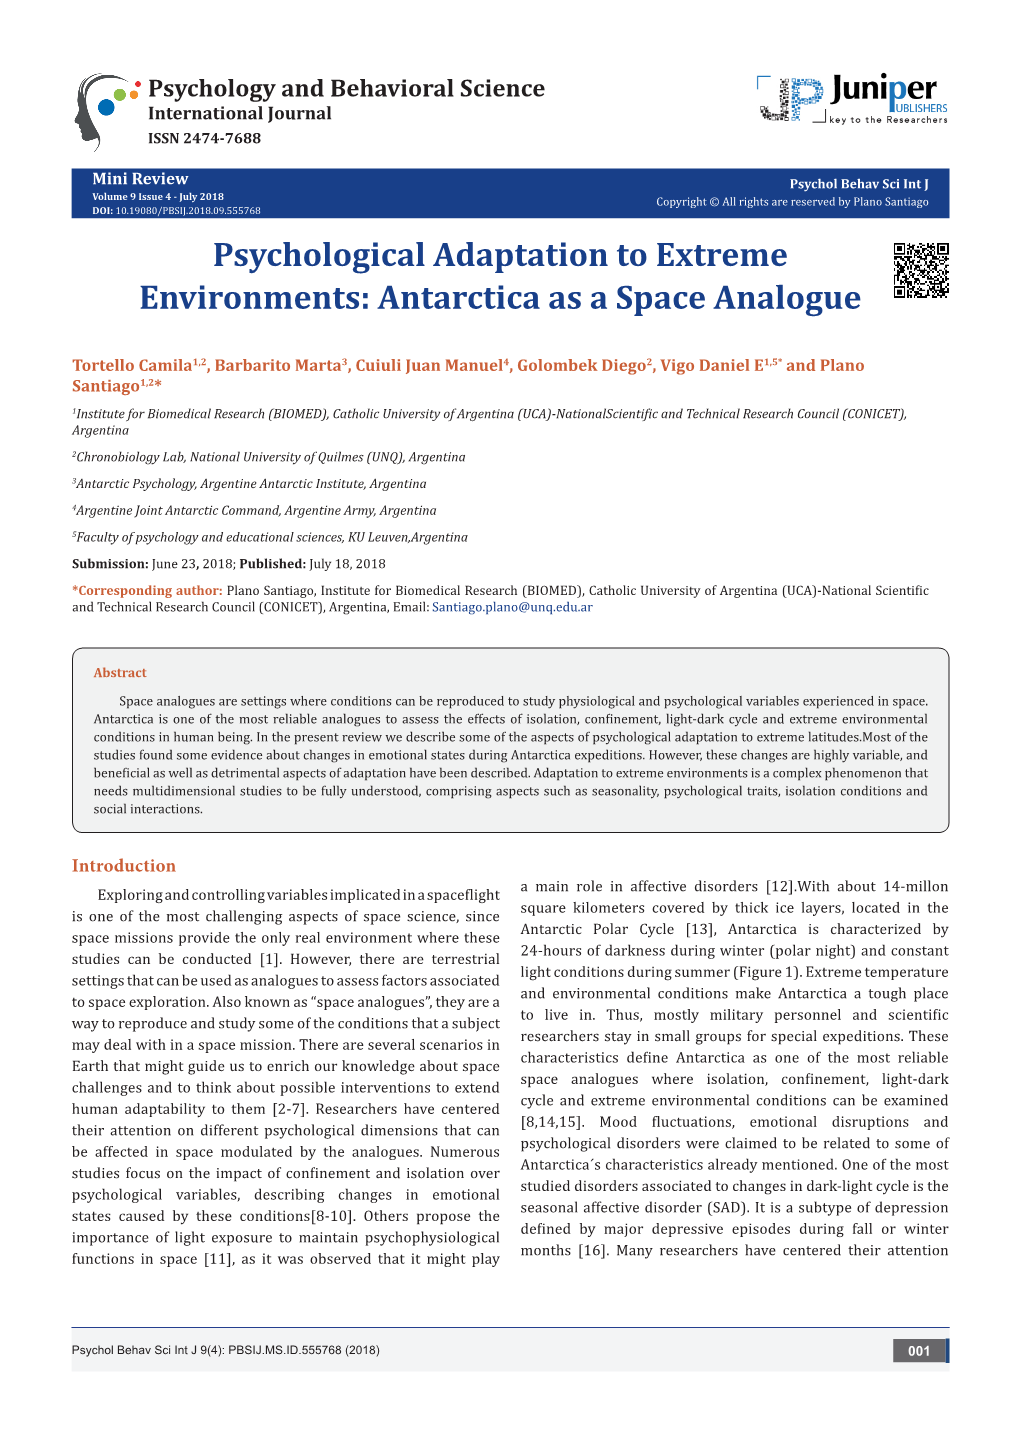 Psychological Adaptation to Extreme Environments:Antarctica As A